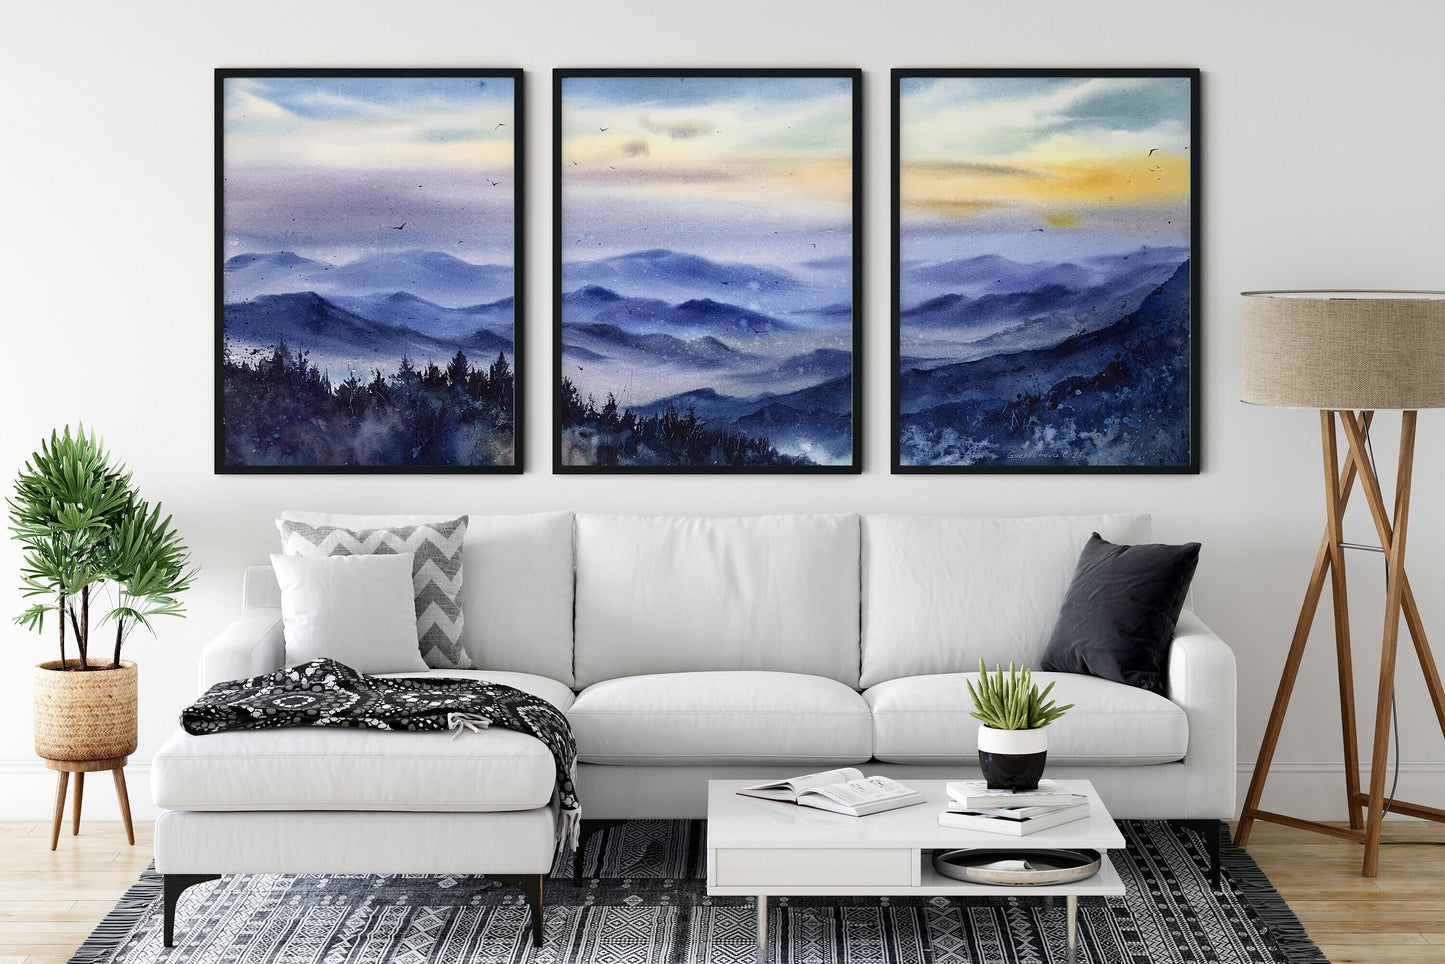 Set of 3 Fog Mountains Print, Nature Gallery Wall Prints, Blue Mountain Landscape 3 Piece Wall Art, Foggy Morning Forest